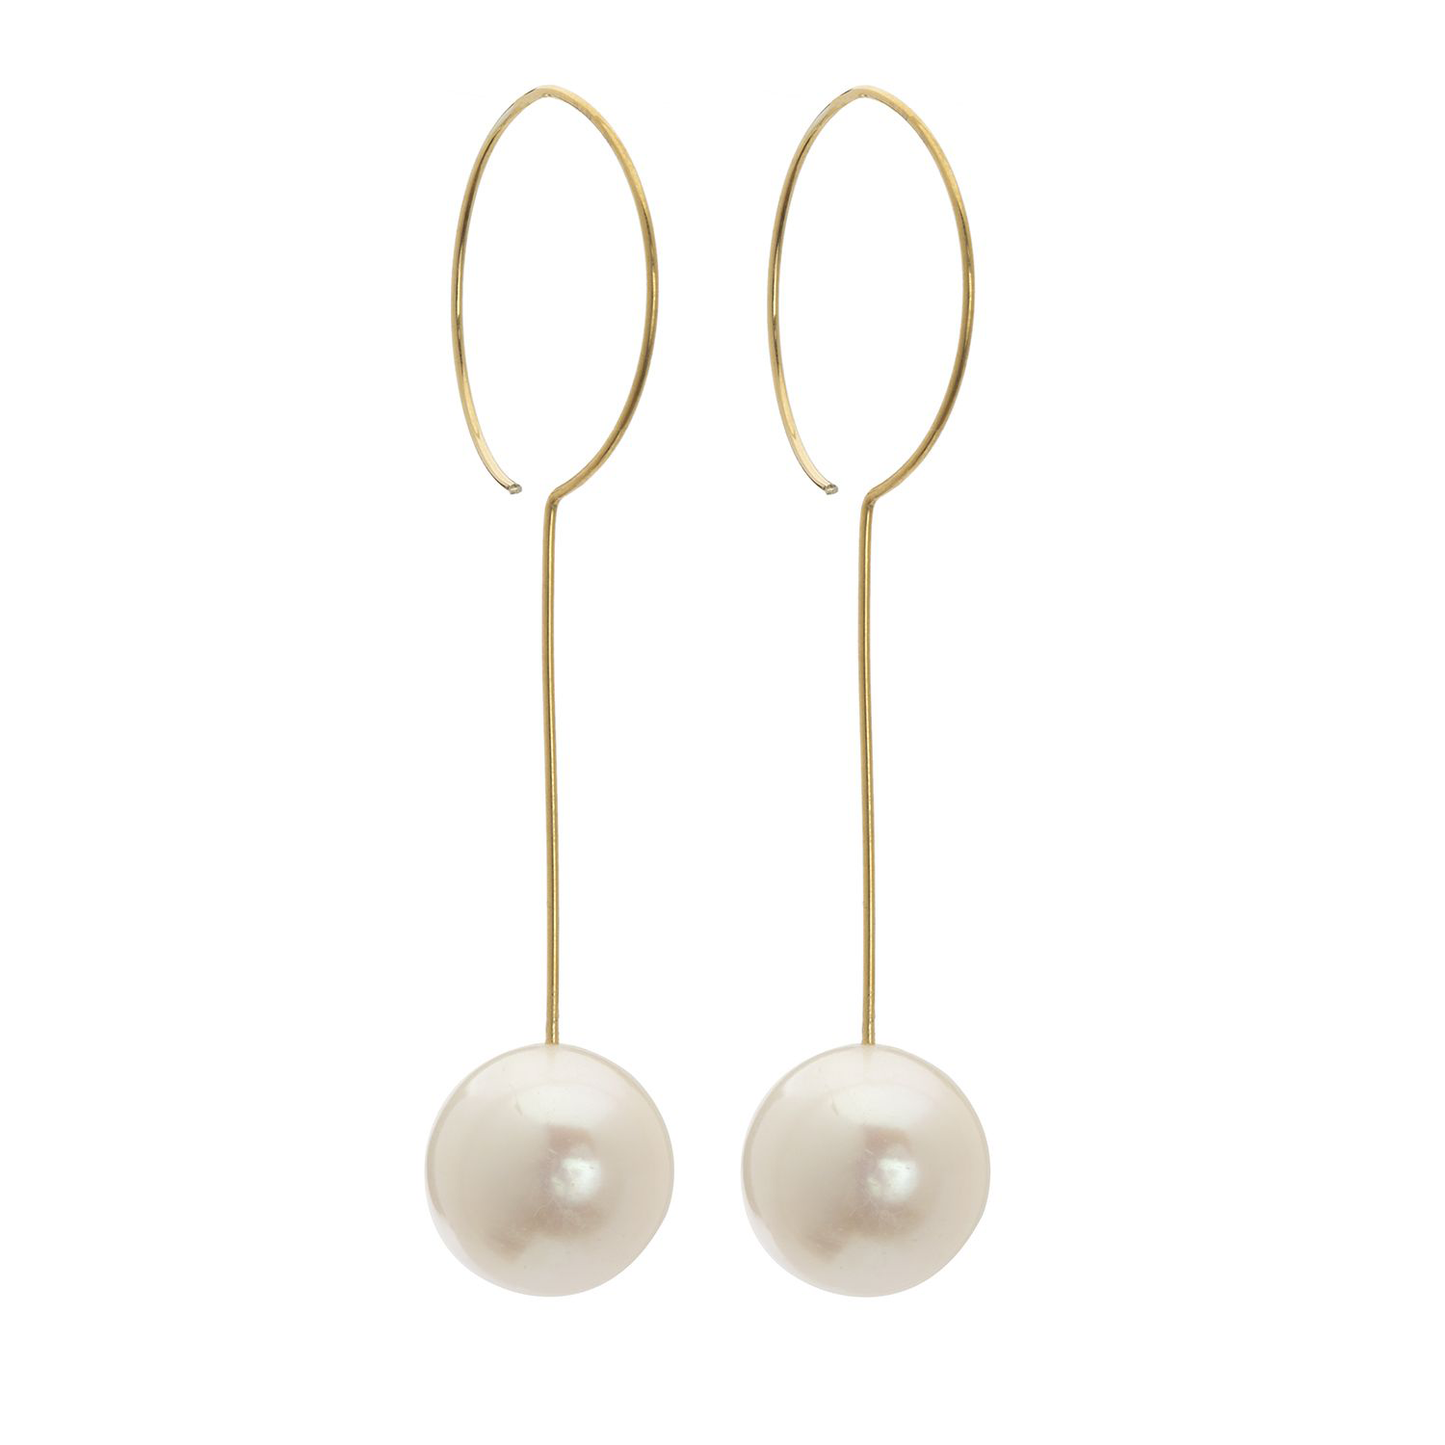 Long Drop Earrings with Round Freshwater Pearls (12mm)